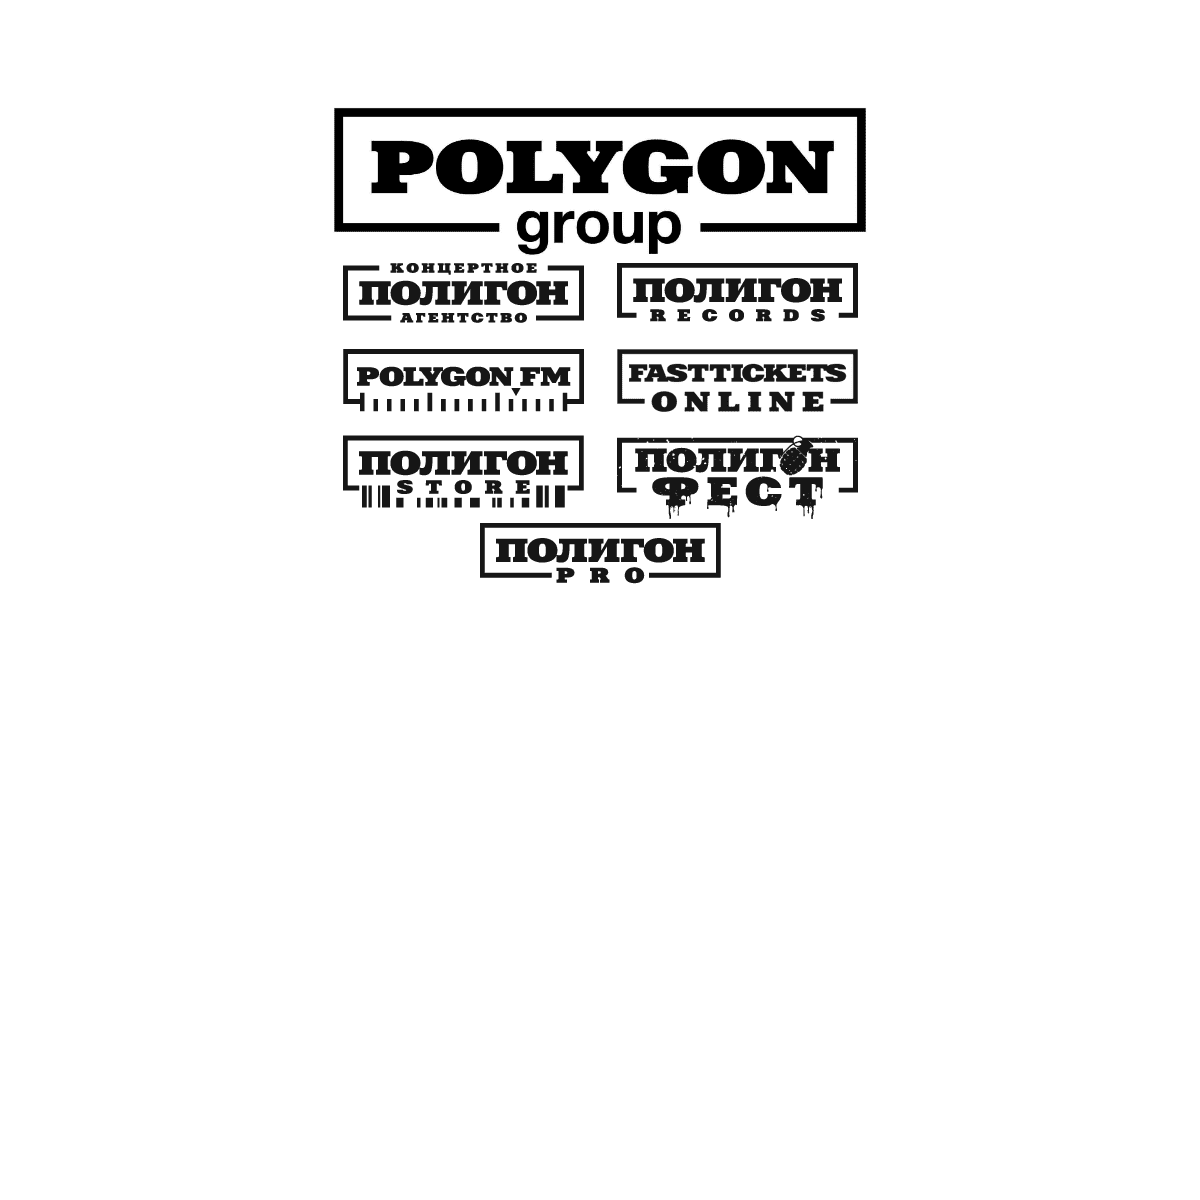 A complete backup of polygon.group